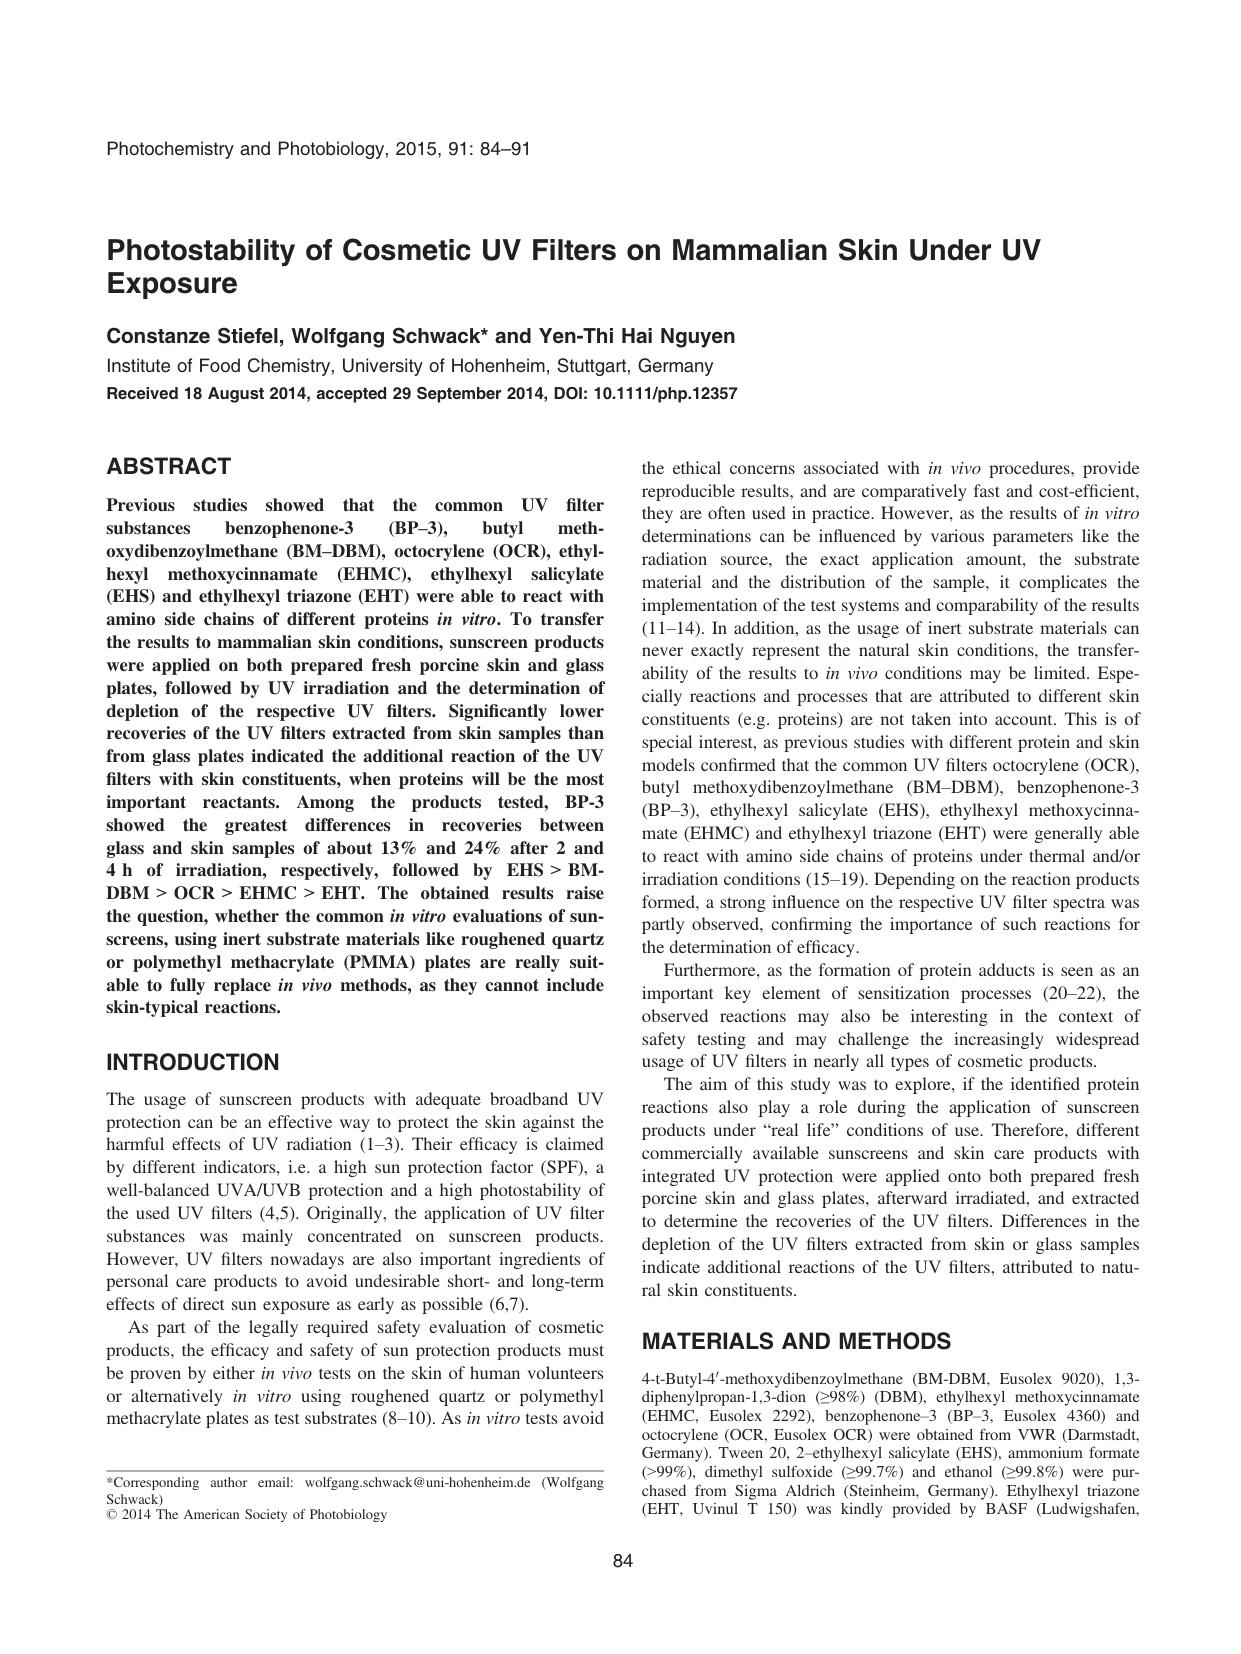 Photostability of Cosmetic UV Filters on Mammalian Skin Under UV Exposure by Unknown